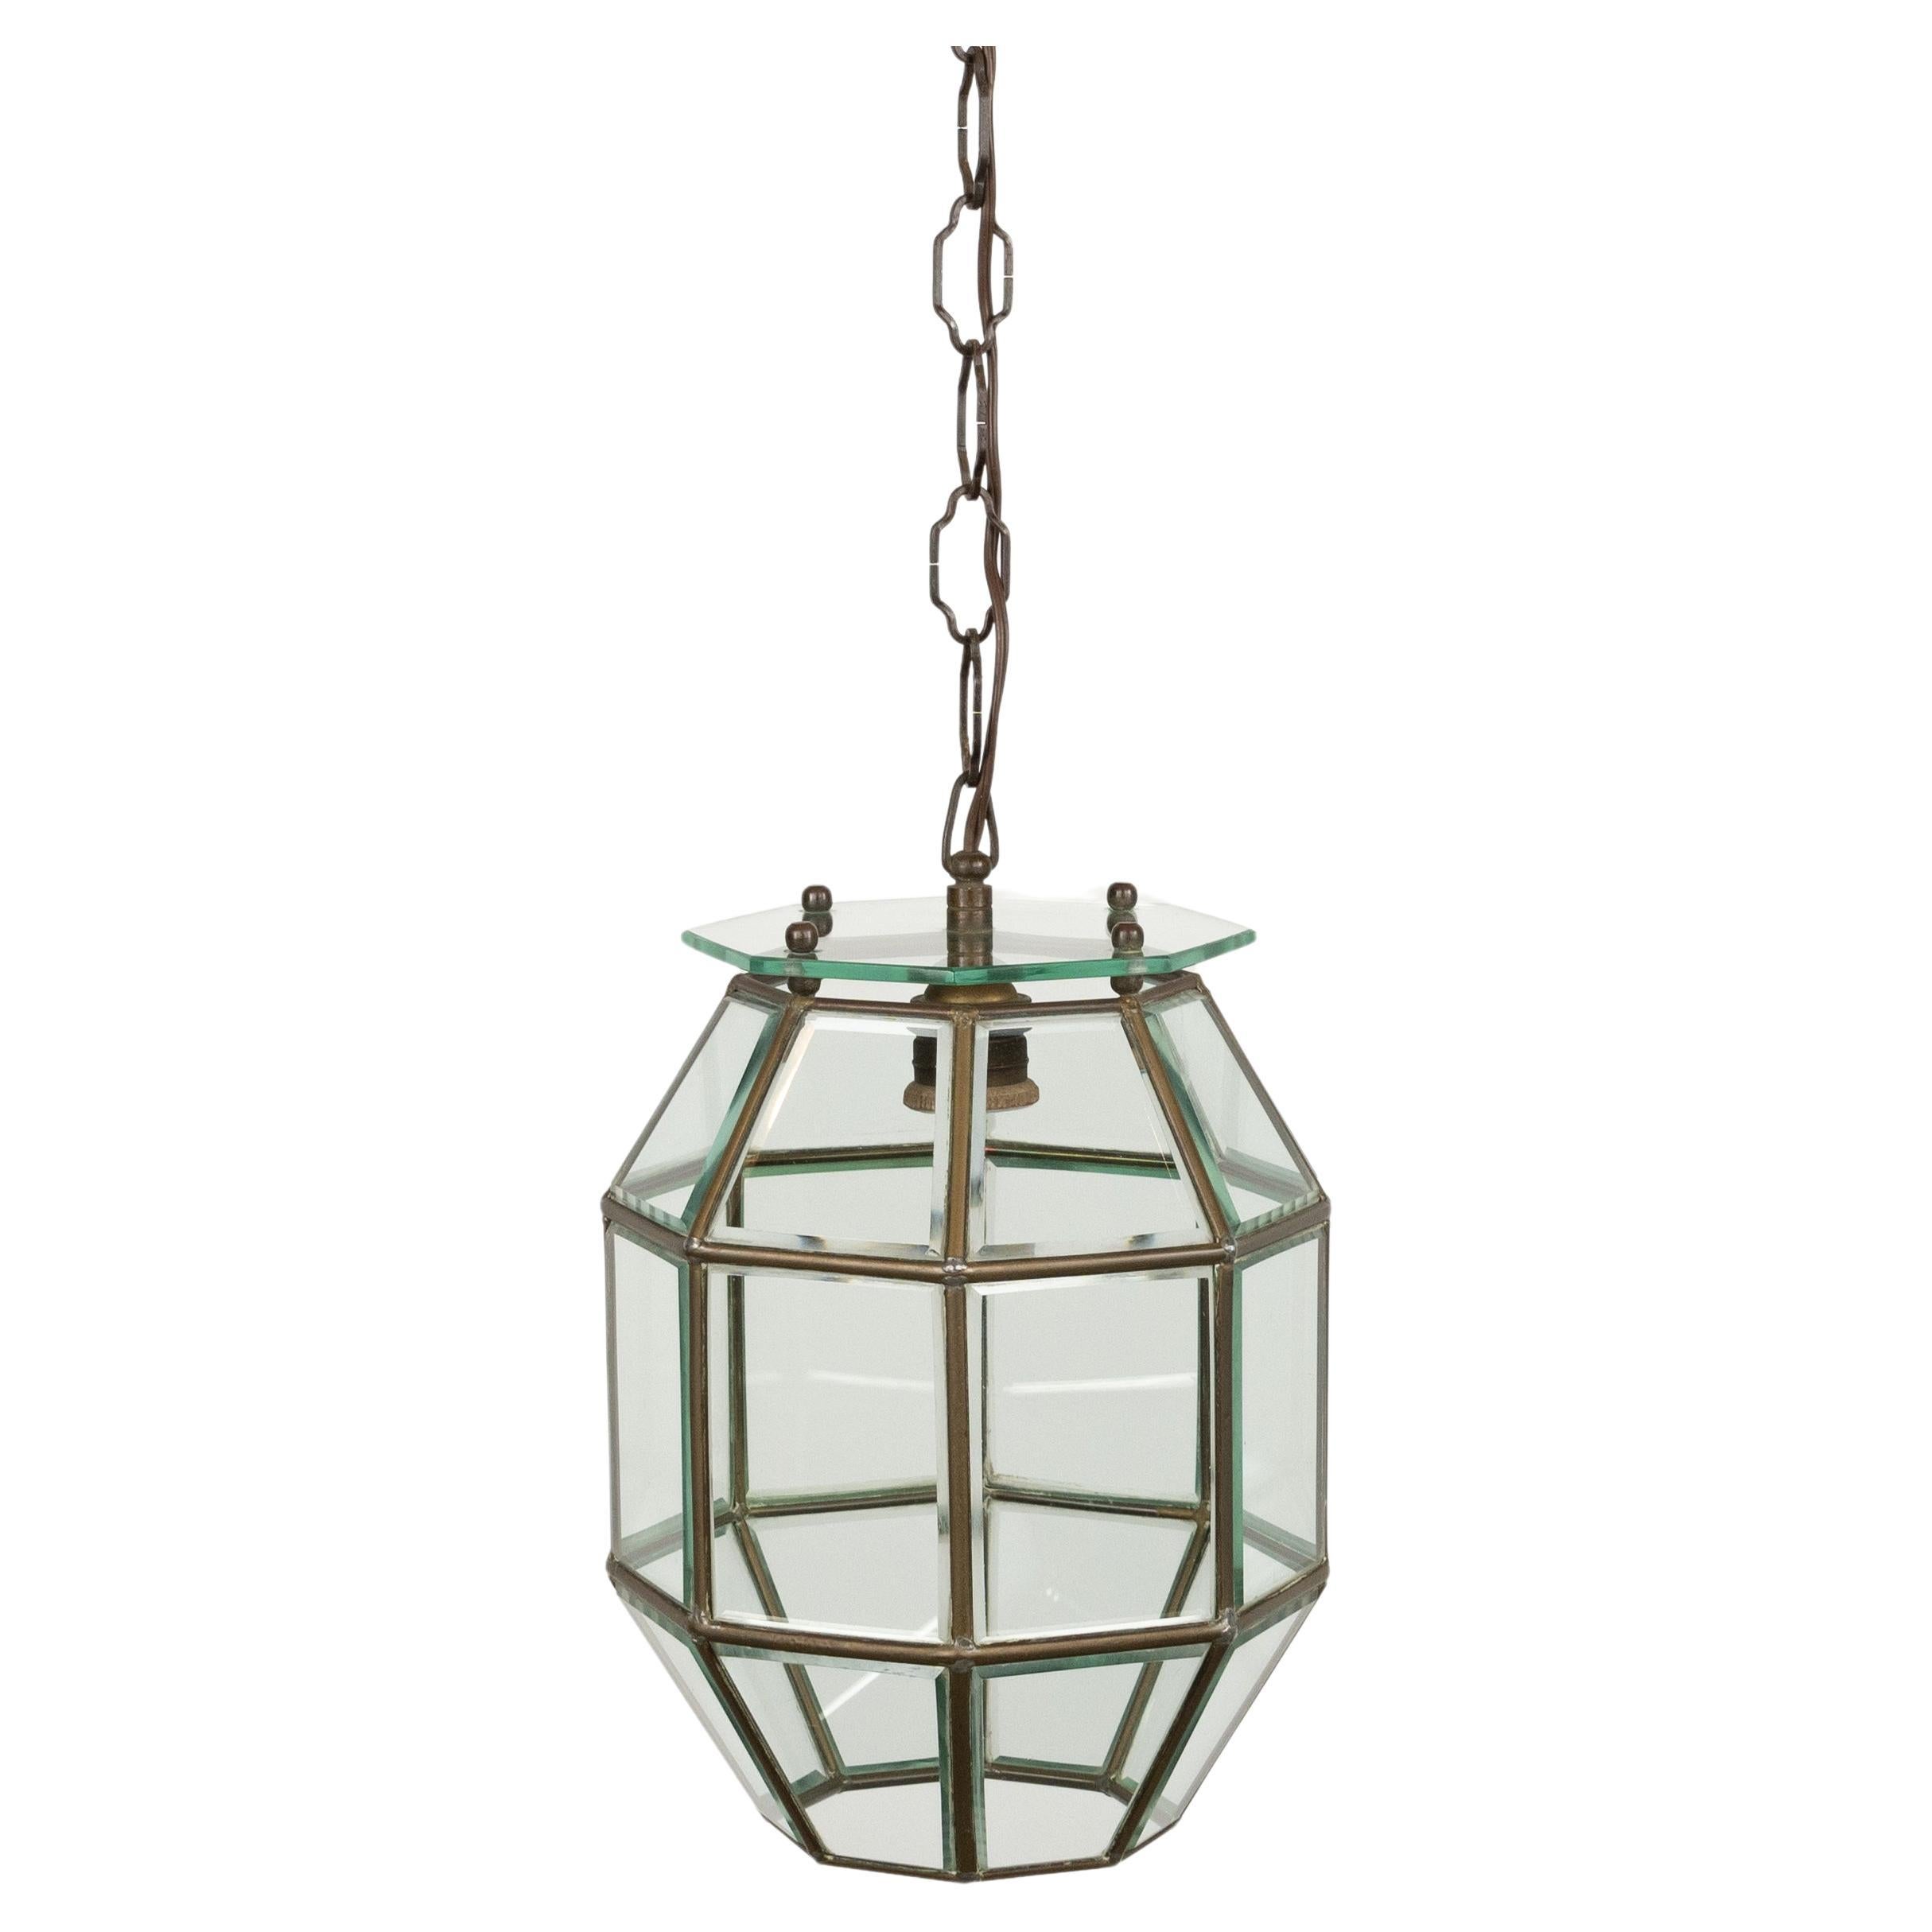 Chandelier Lantern in Brass and Beveled Glass Adolf Loos Style, Italy 1950s For Sale 2